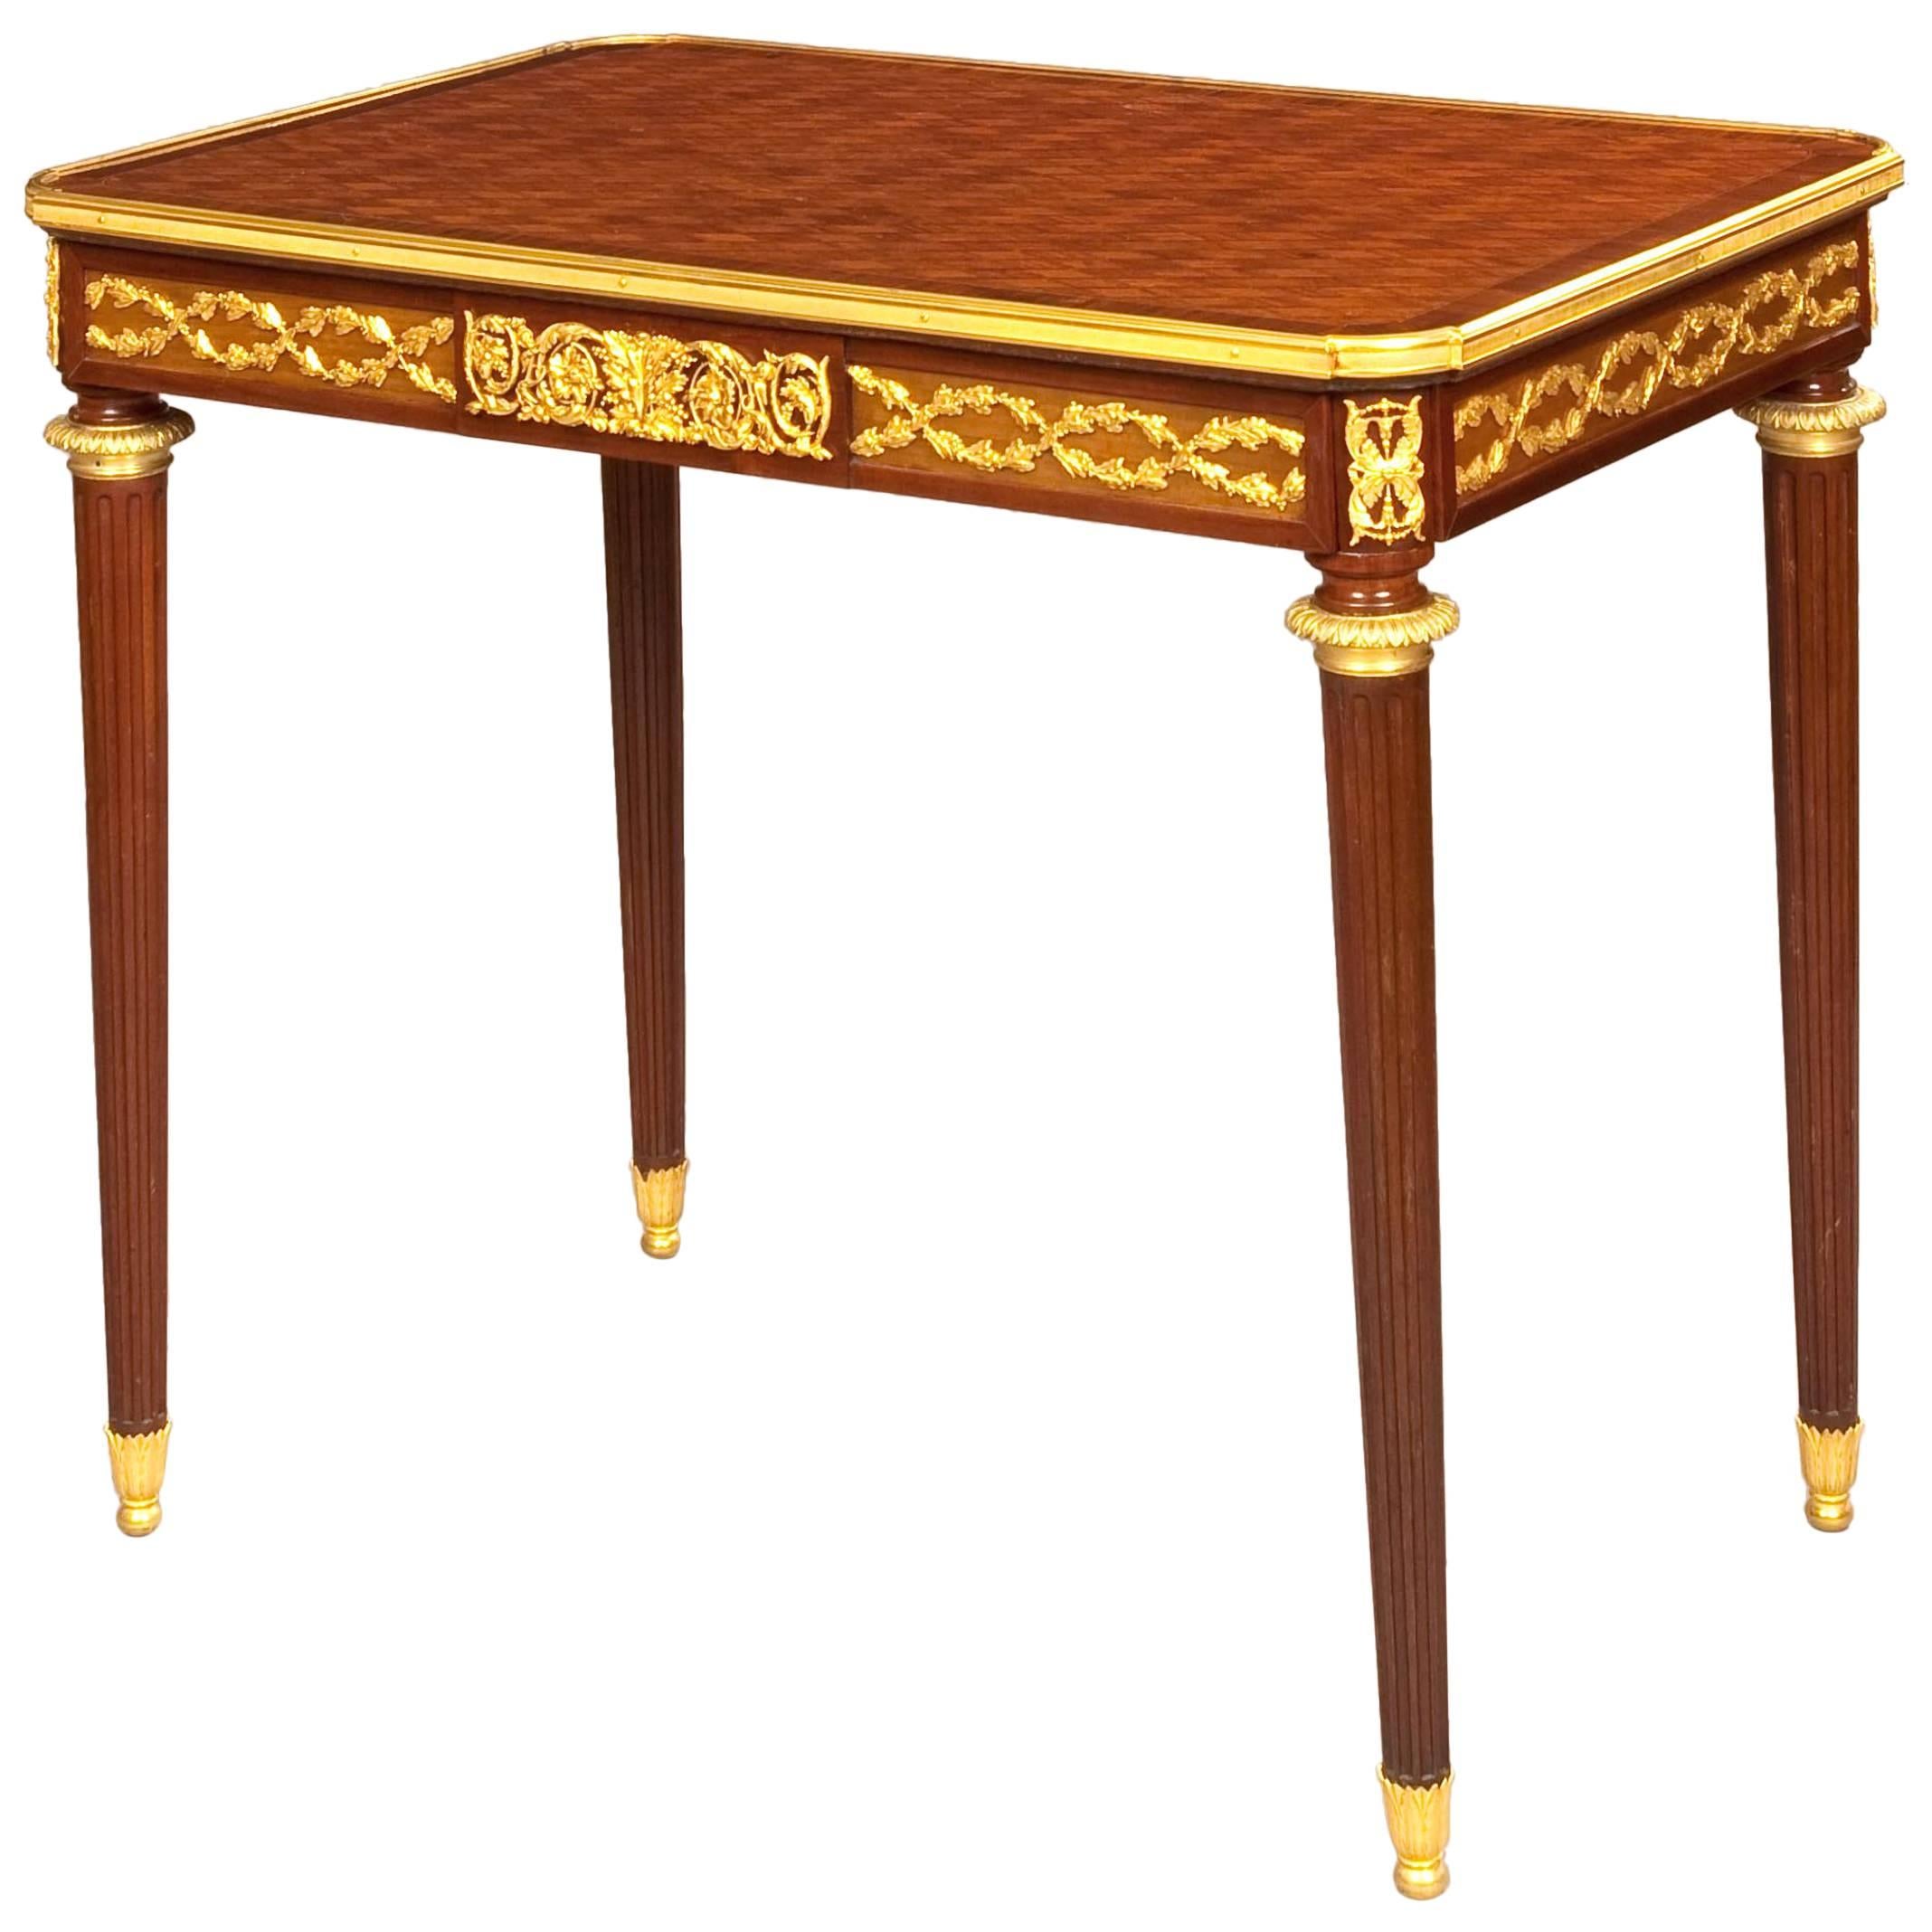 French 19th Century Mahogany and Gilt Bronze Side Table by Fernand Kohl